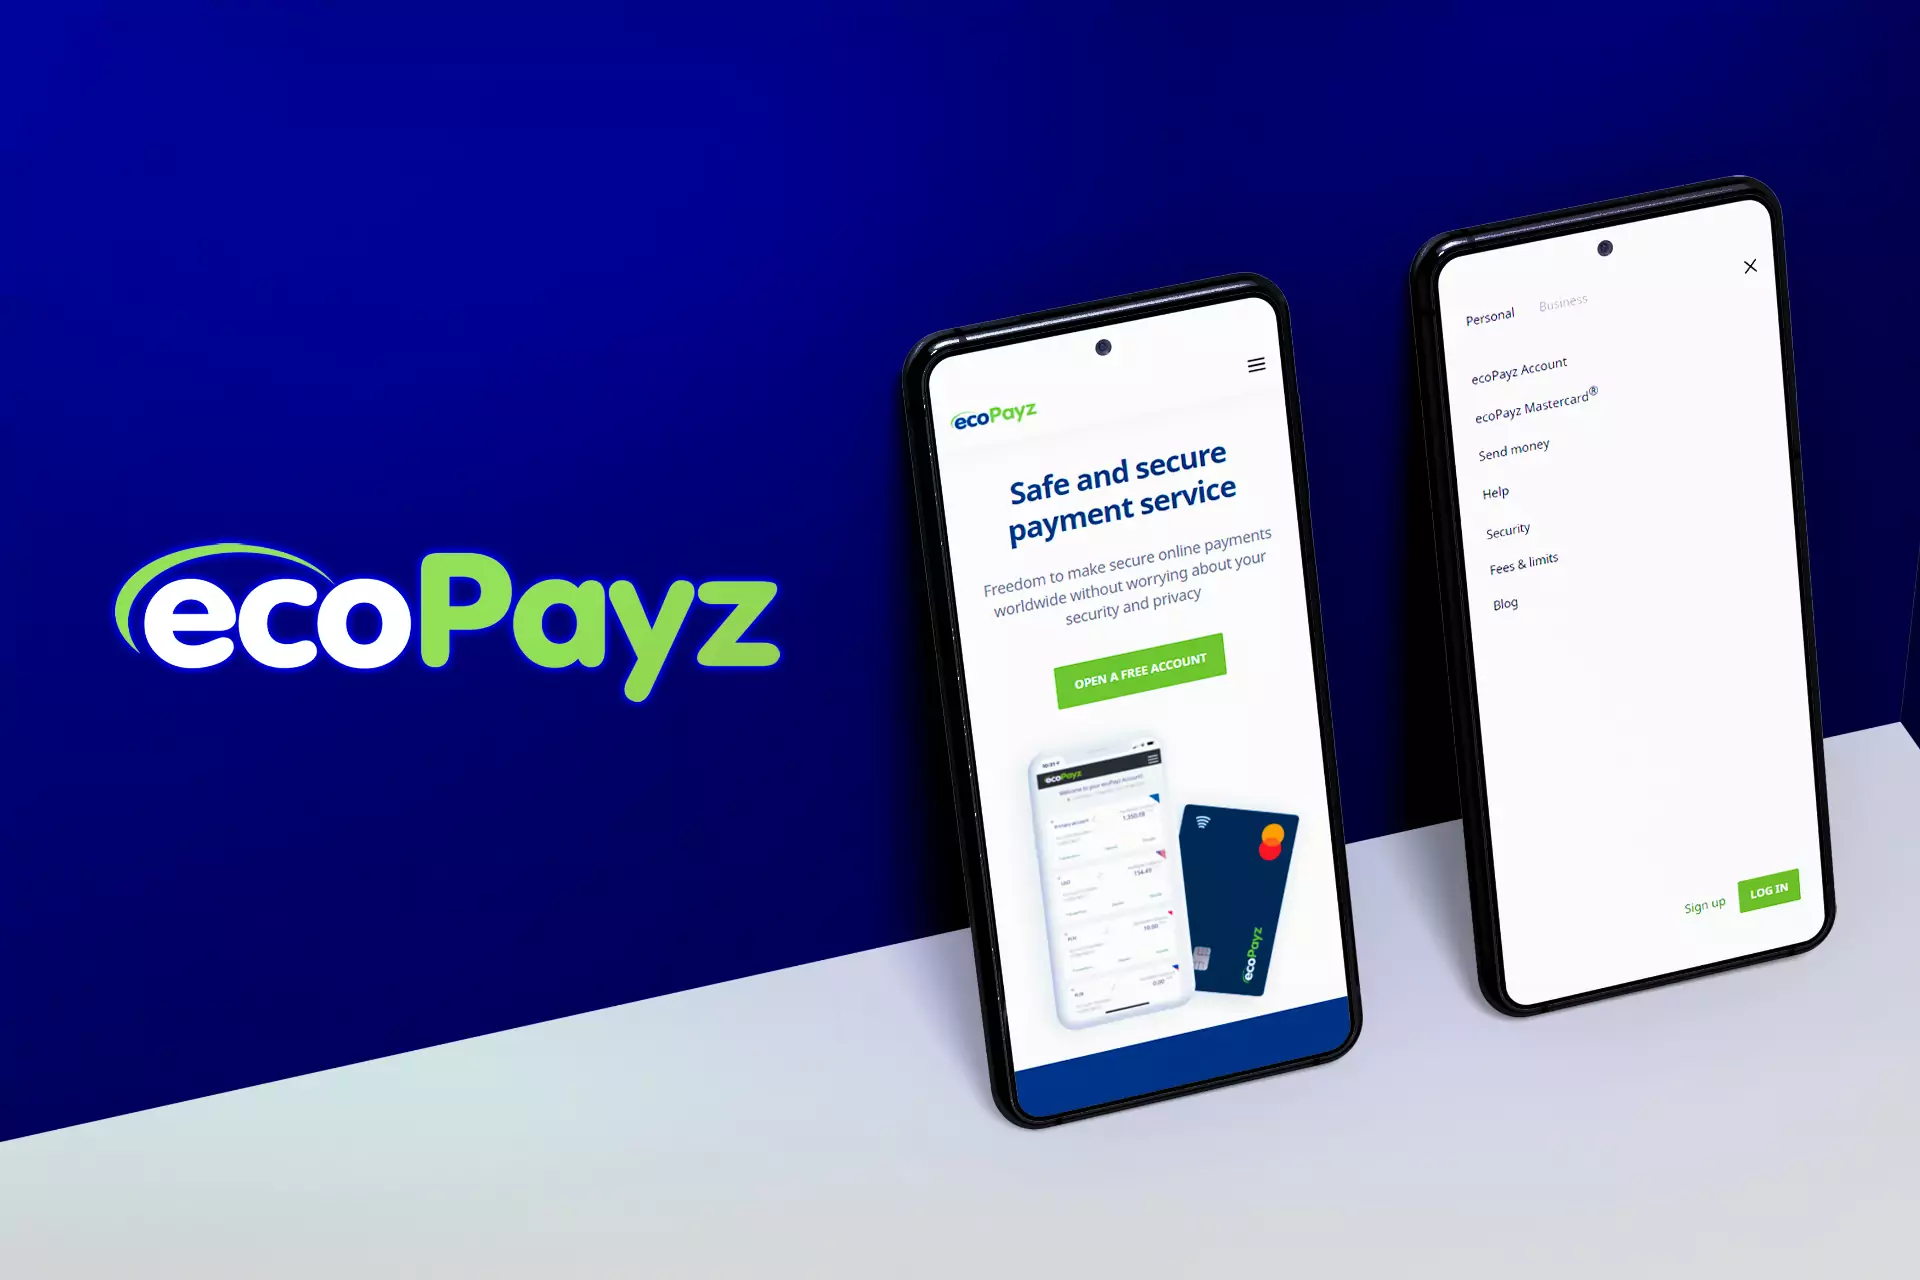 Ecopayz is an international e-wallet that allows making transfers quickly and securely.